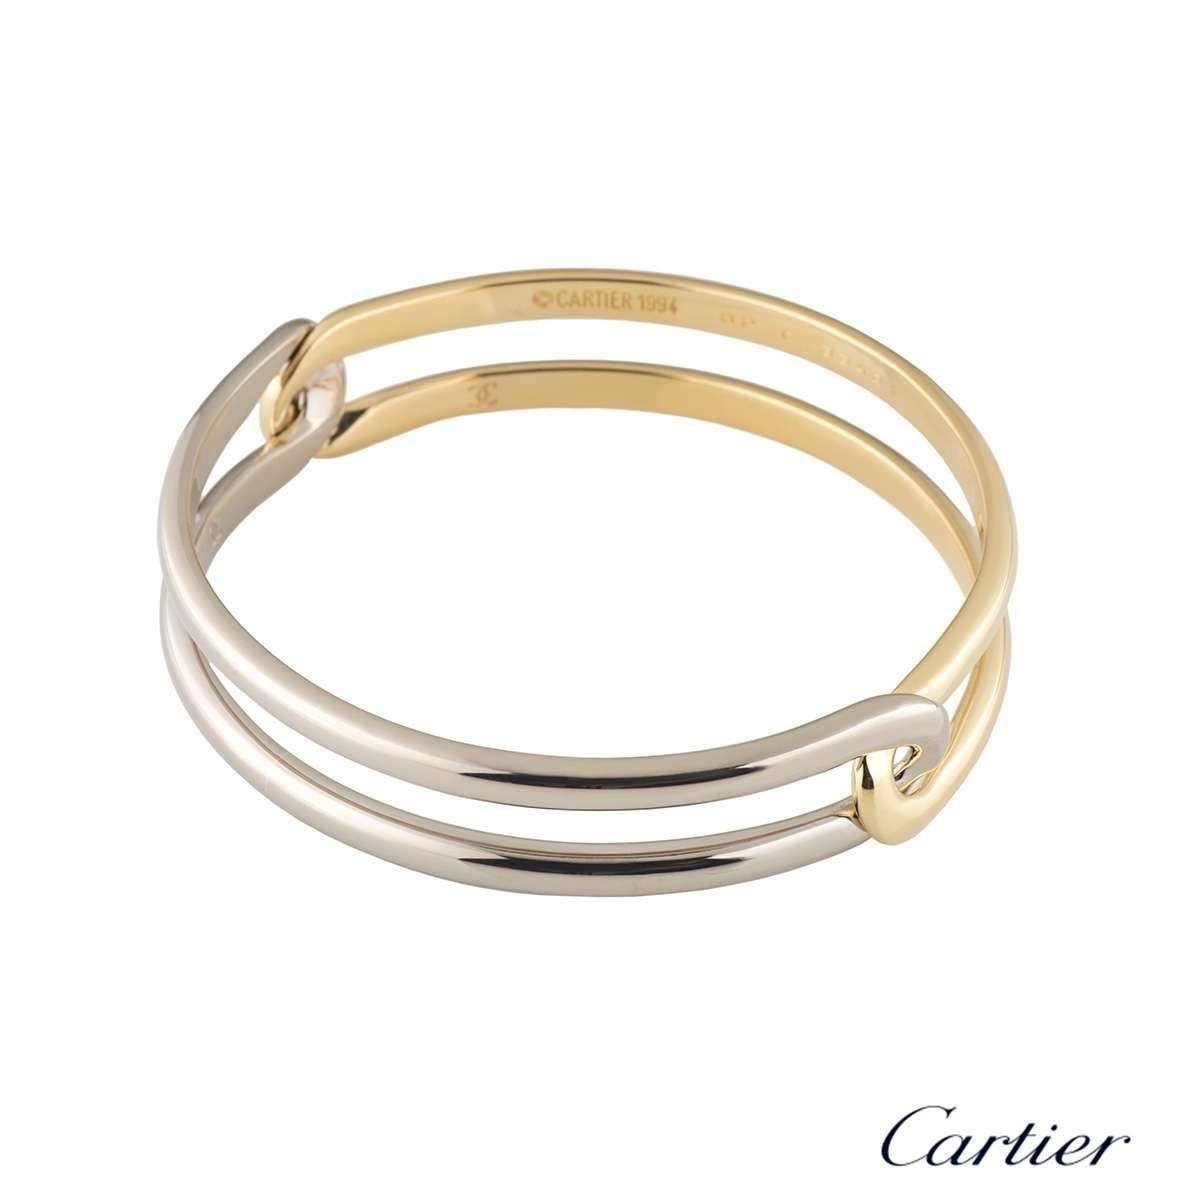 A unique 18k yellow and white gold Cartier bangle. The bangle comprises of a open work double yellow gold and double white gold band interlocking half way round. The bangle measures 13mm in width and fits up to a wrist size of 19cm. The bangle has a